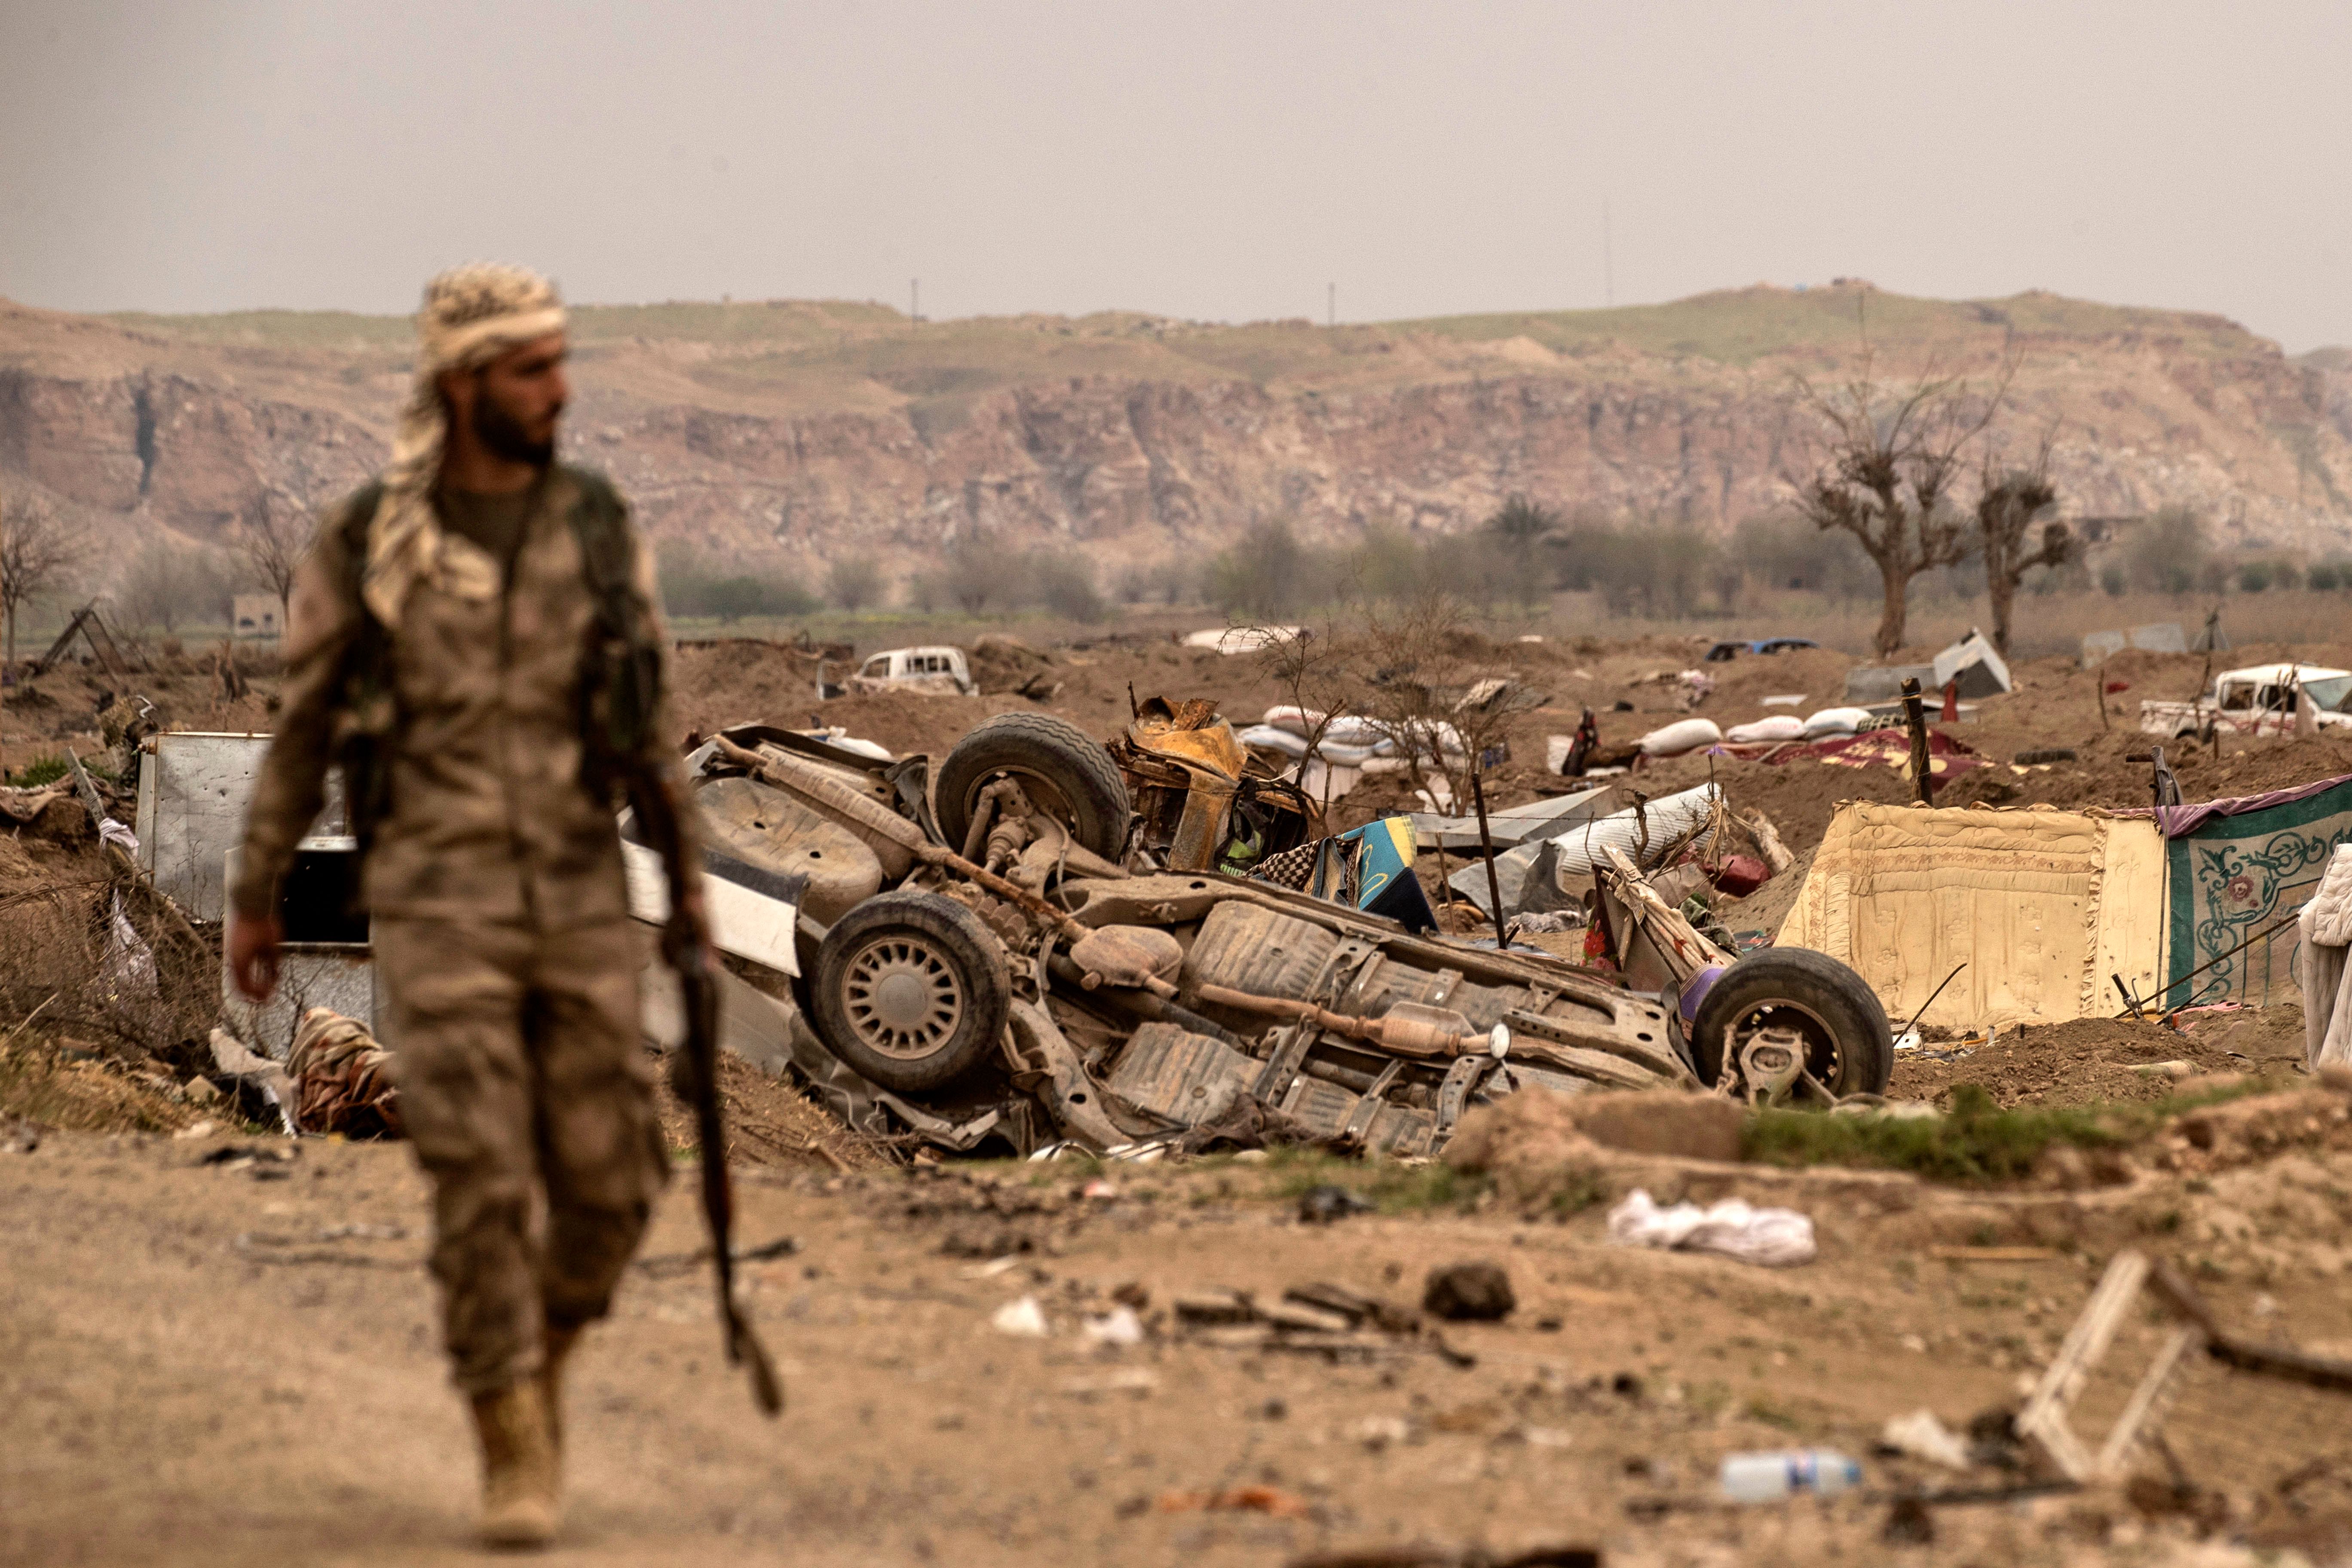 A member of the SDF walks past damaged vehicles on the side of a road in the village of Baghouz in Syria's eastern Deir ez-Zor Province on March 24, 2019, a day after the ISIS "caliphate" was declared defeated. Photo by DELIL SOULEIMAN/AFP via Getty Images.